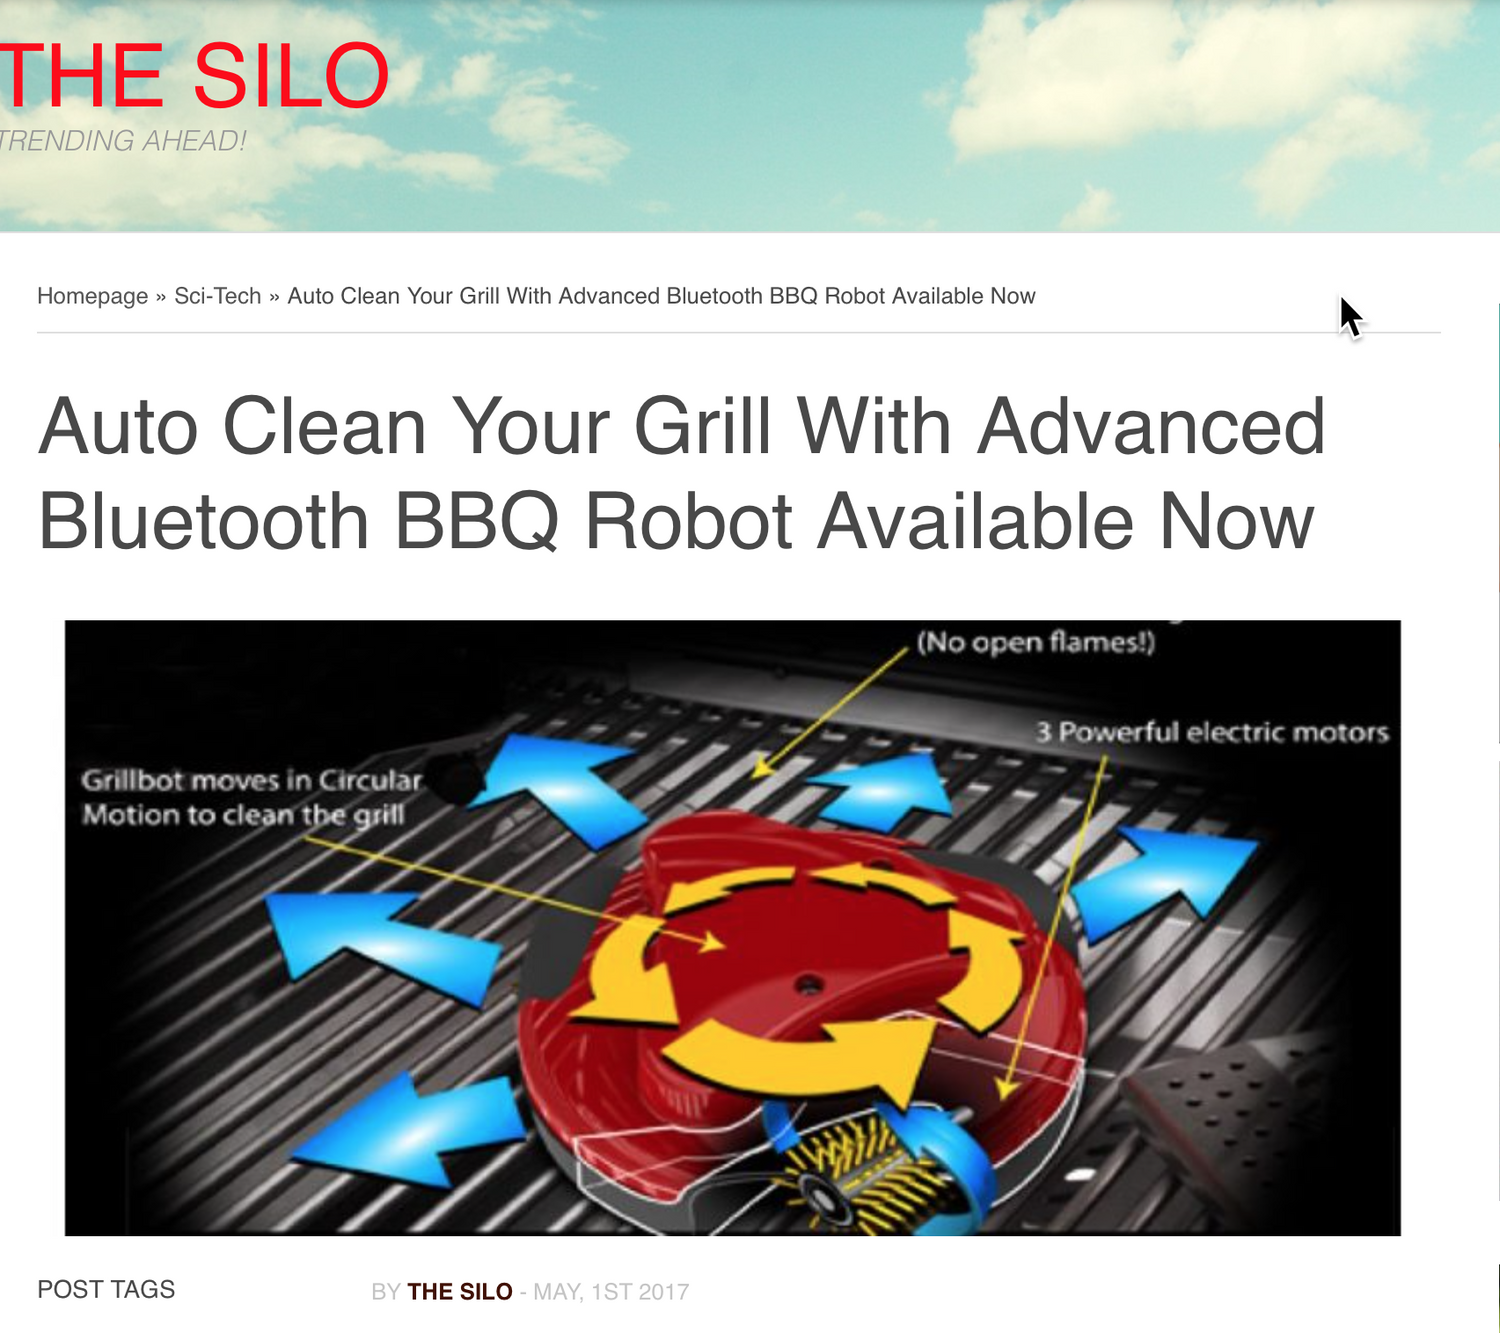 Bluetooth Grillbot?! Read the News from The Silo.ca